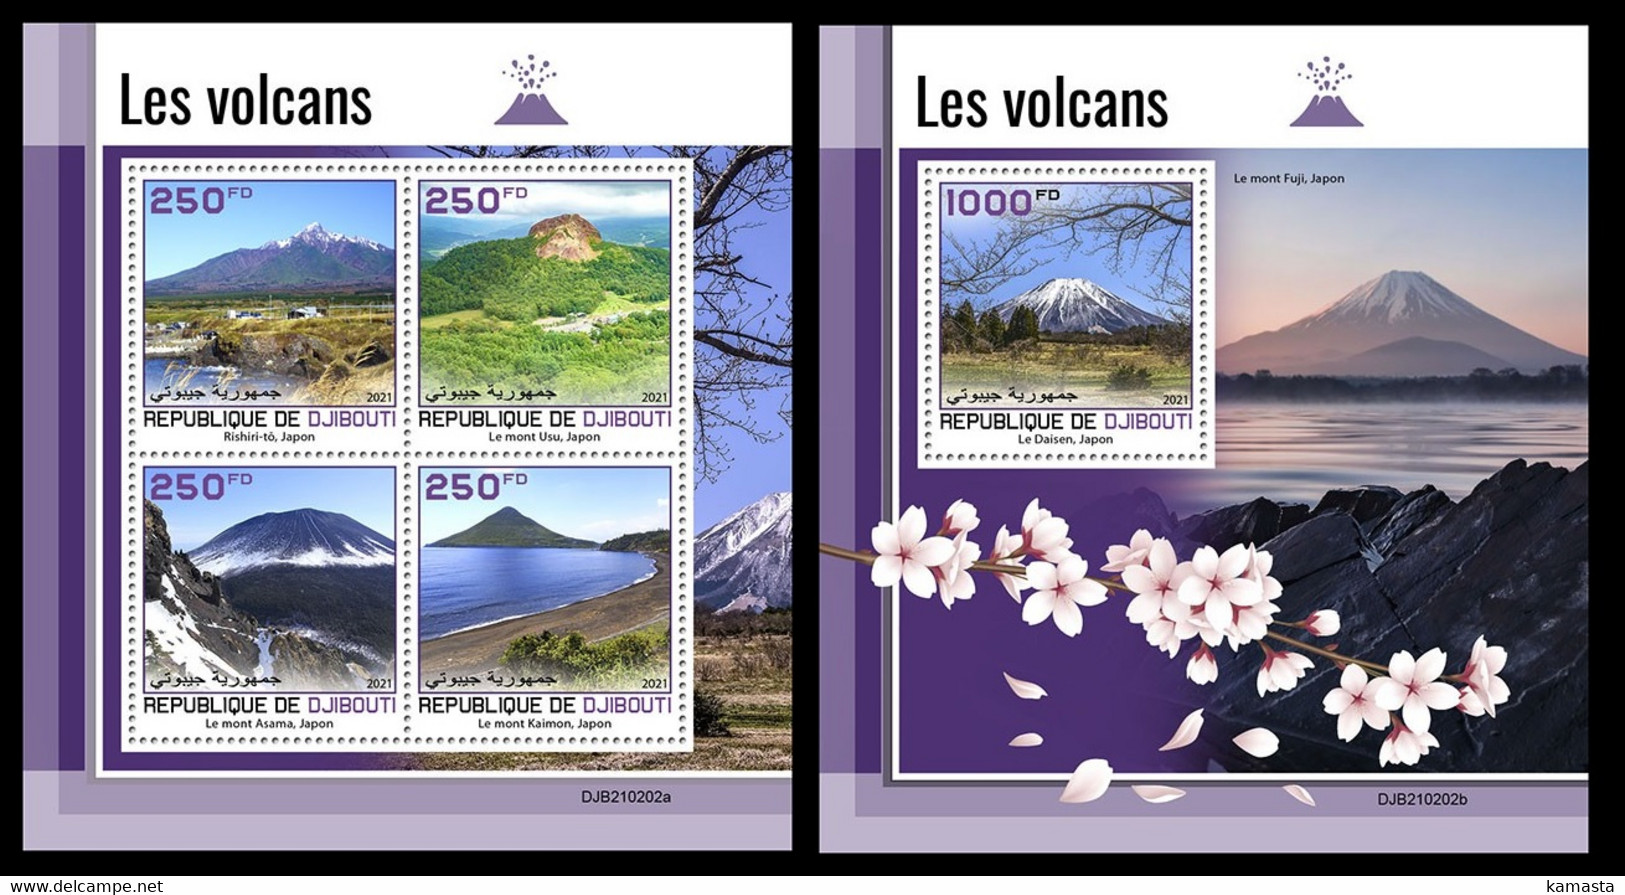 Djibouti 2021 Volcanoes. (202) OFFICIAL ISSUE - Volcanes